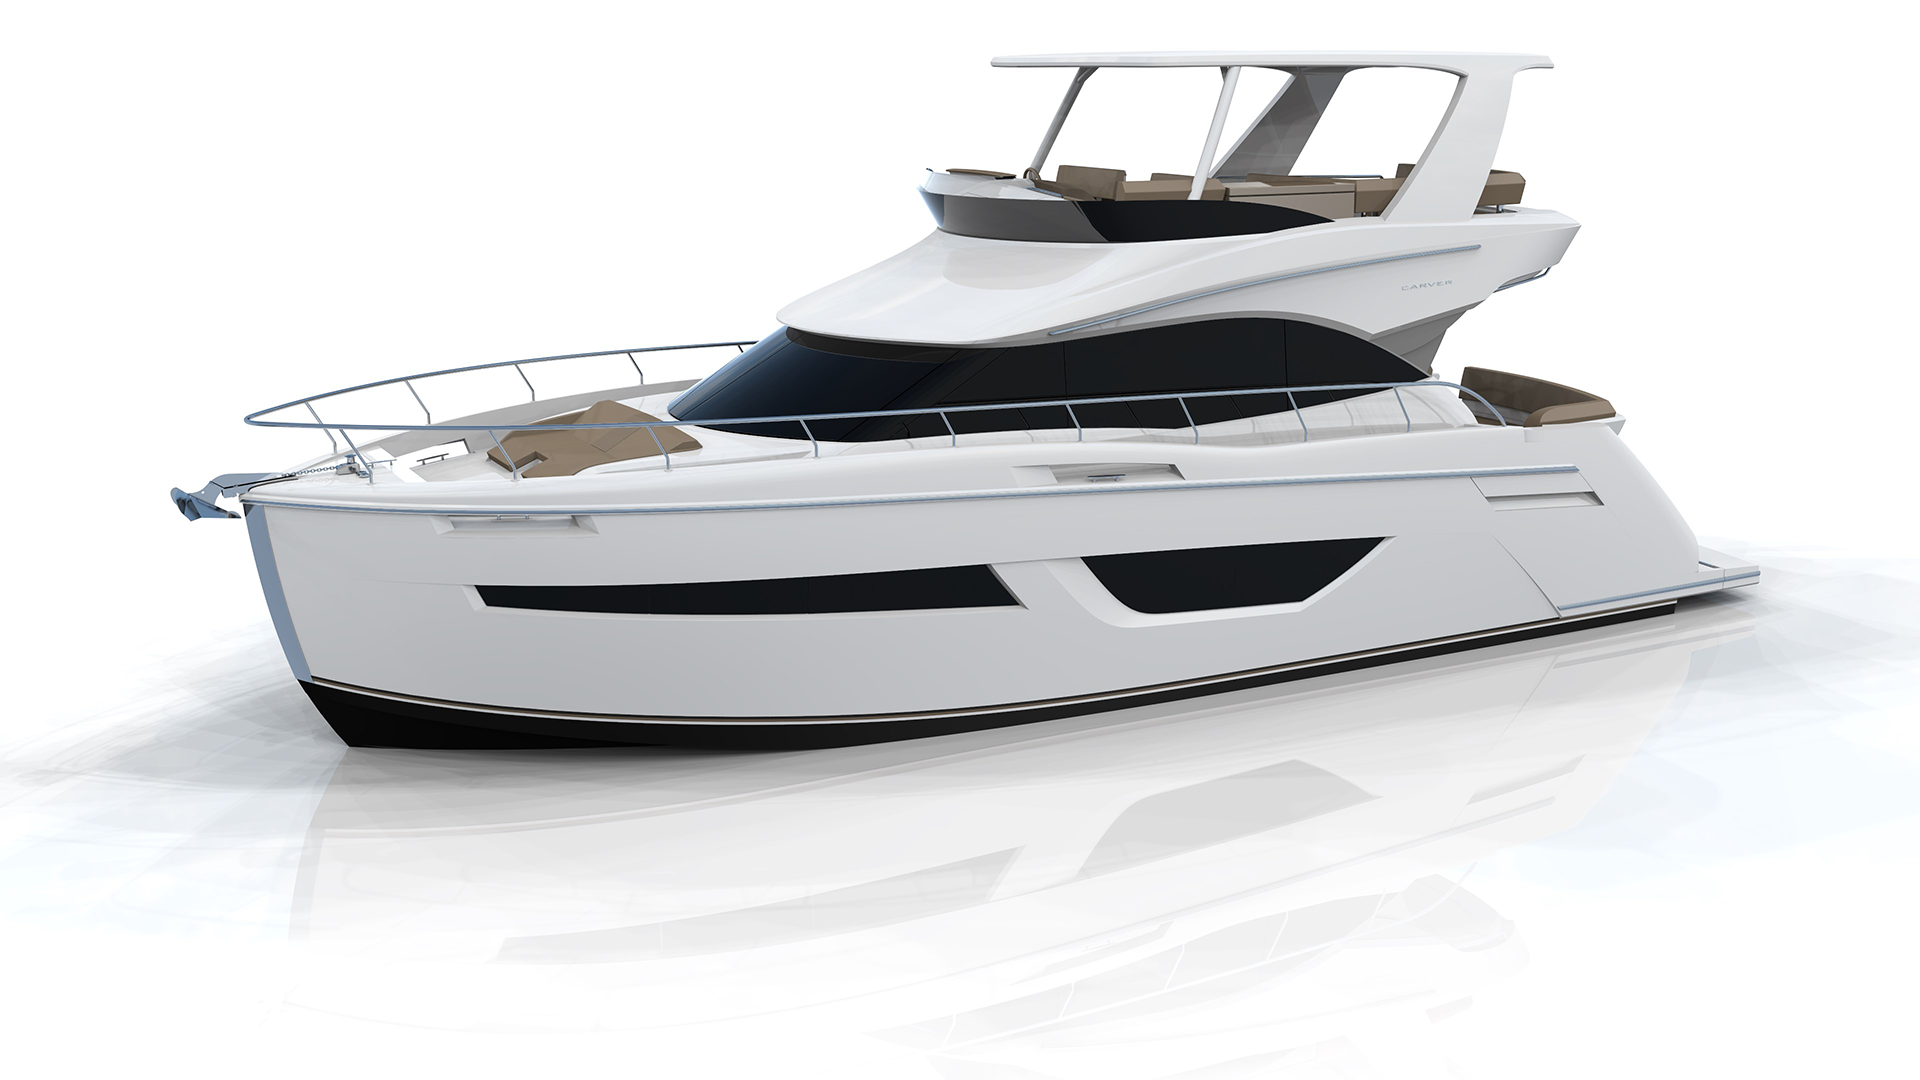 Centerpointe At The Miami Boat Show - Speed Boat, Transparent background PNG HD thumbnail